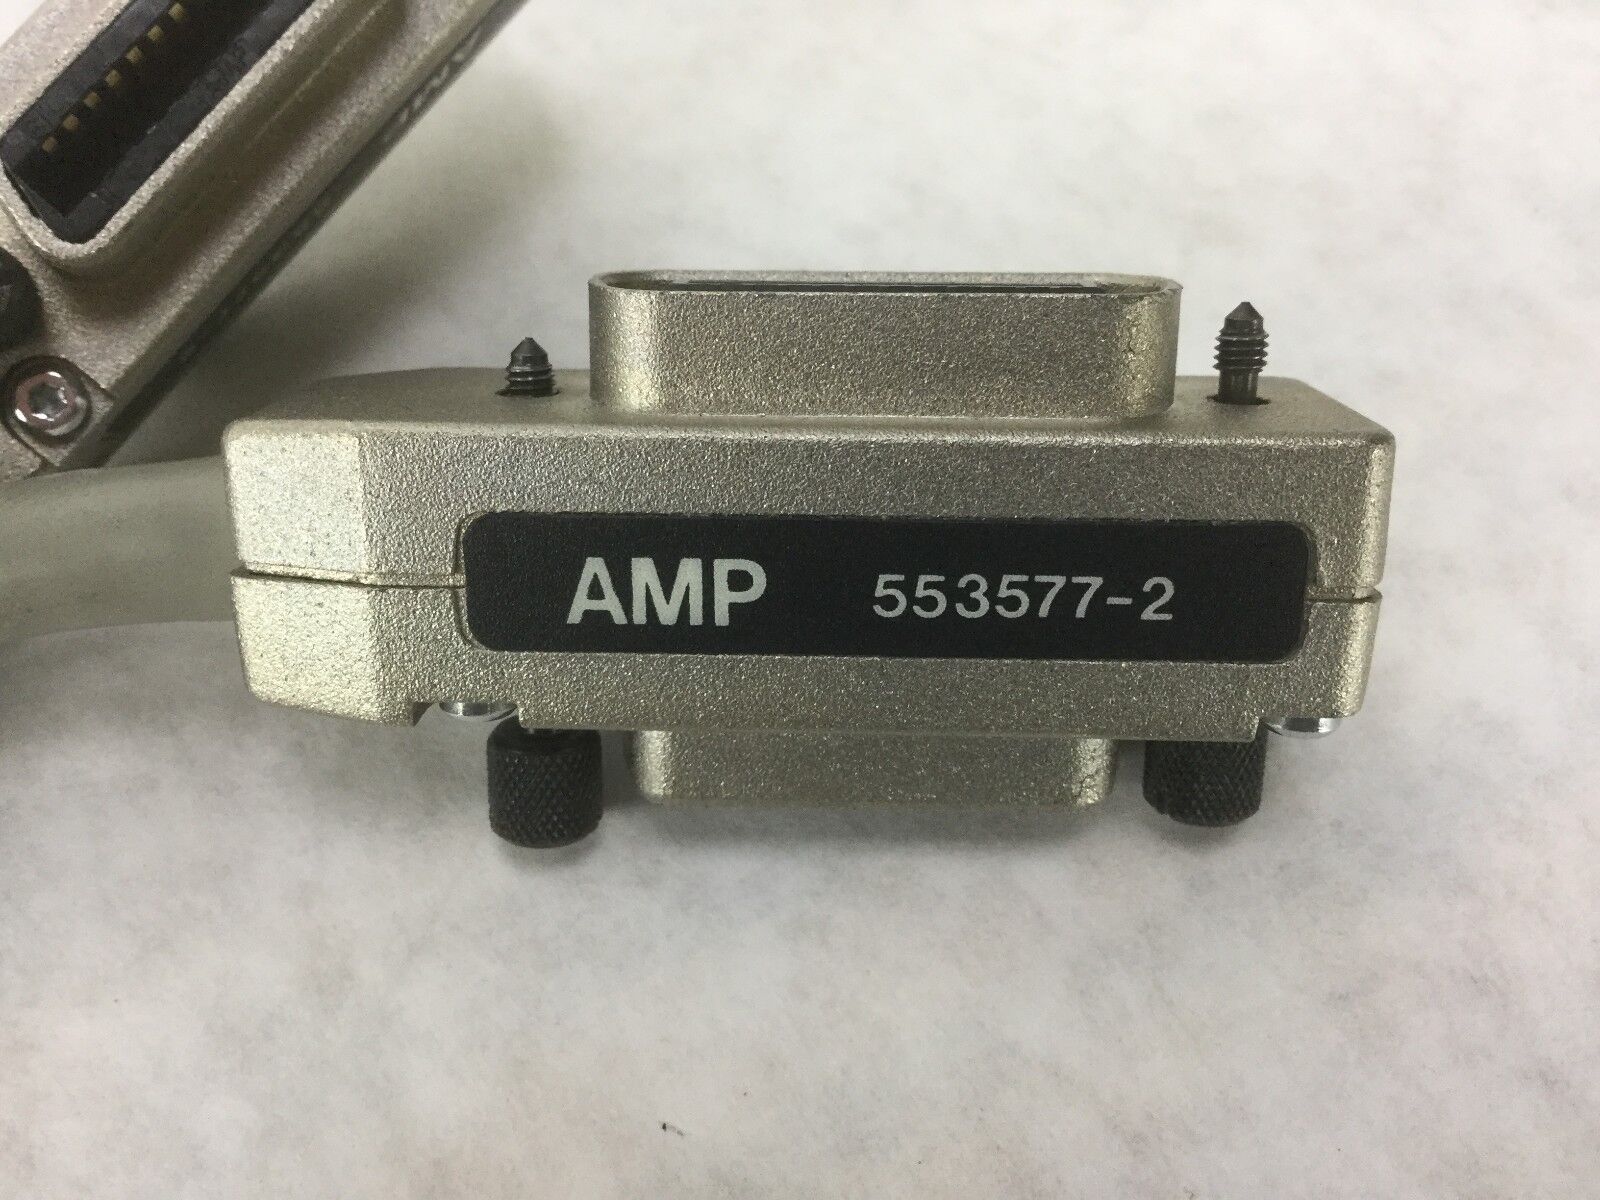 AMP 553577-2 A25886F-2, Approx 3 Ft Cable,